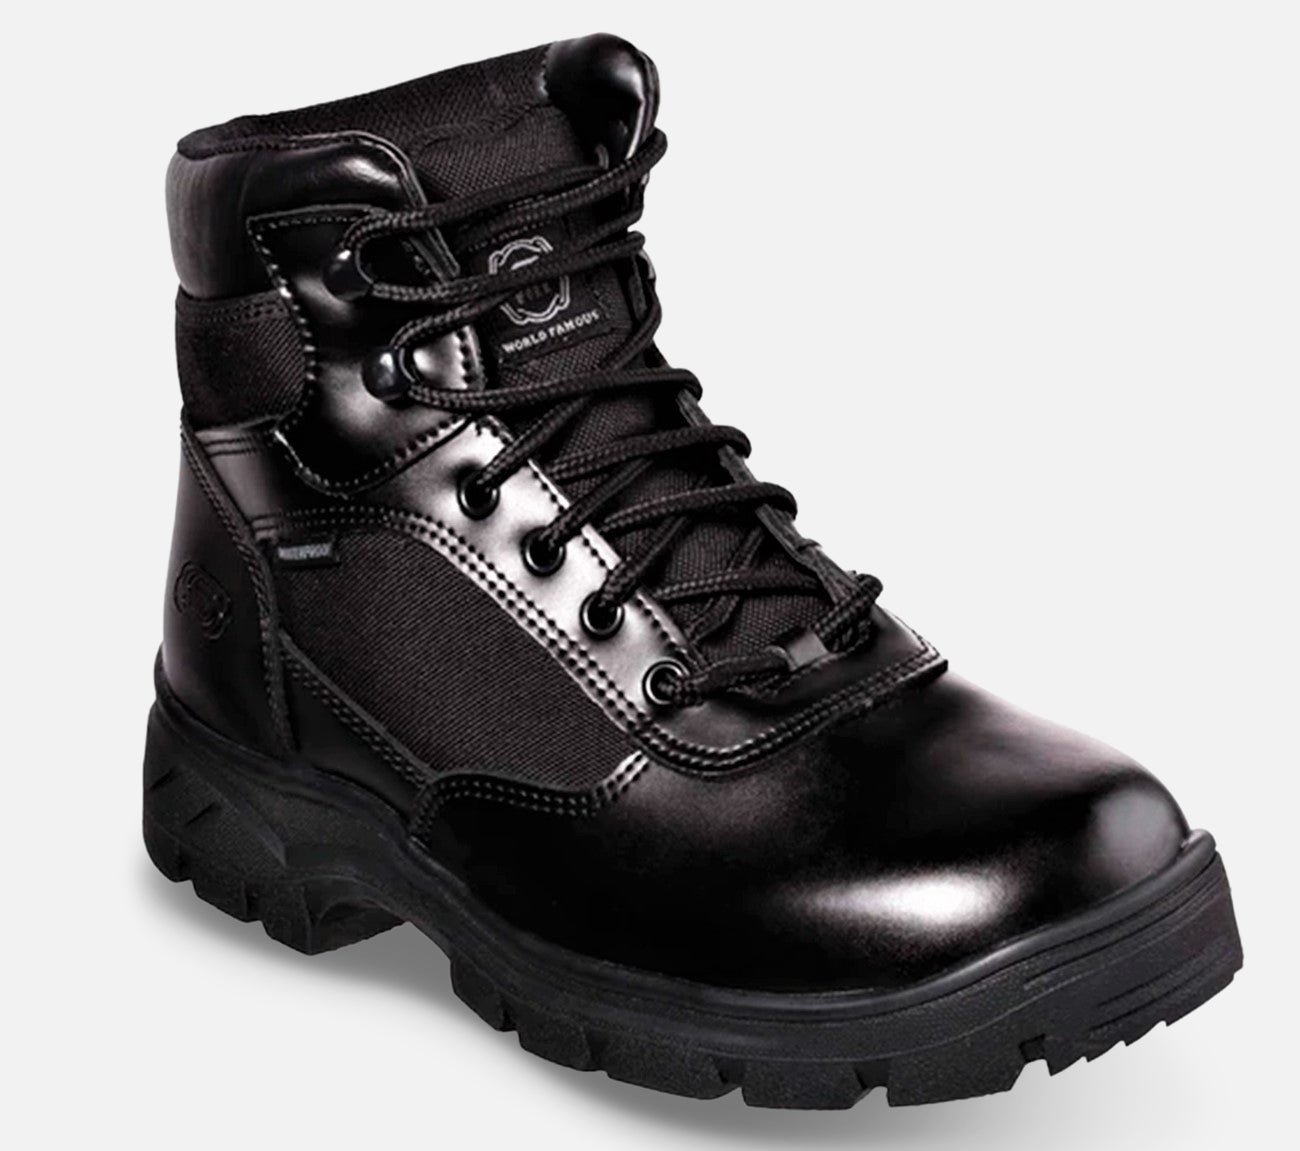 Relaxed Fit: Wascana Russer - Waterproof Boot Skechers